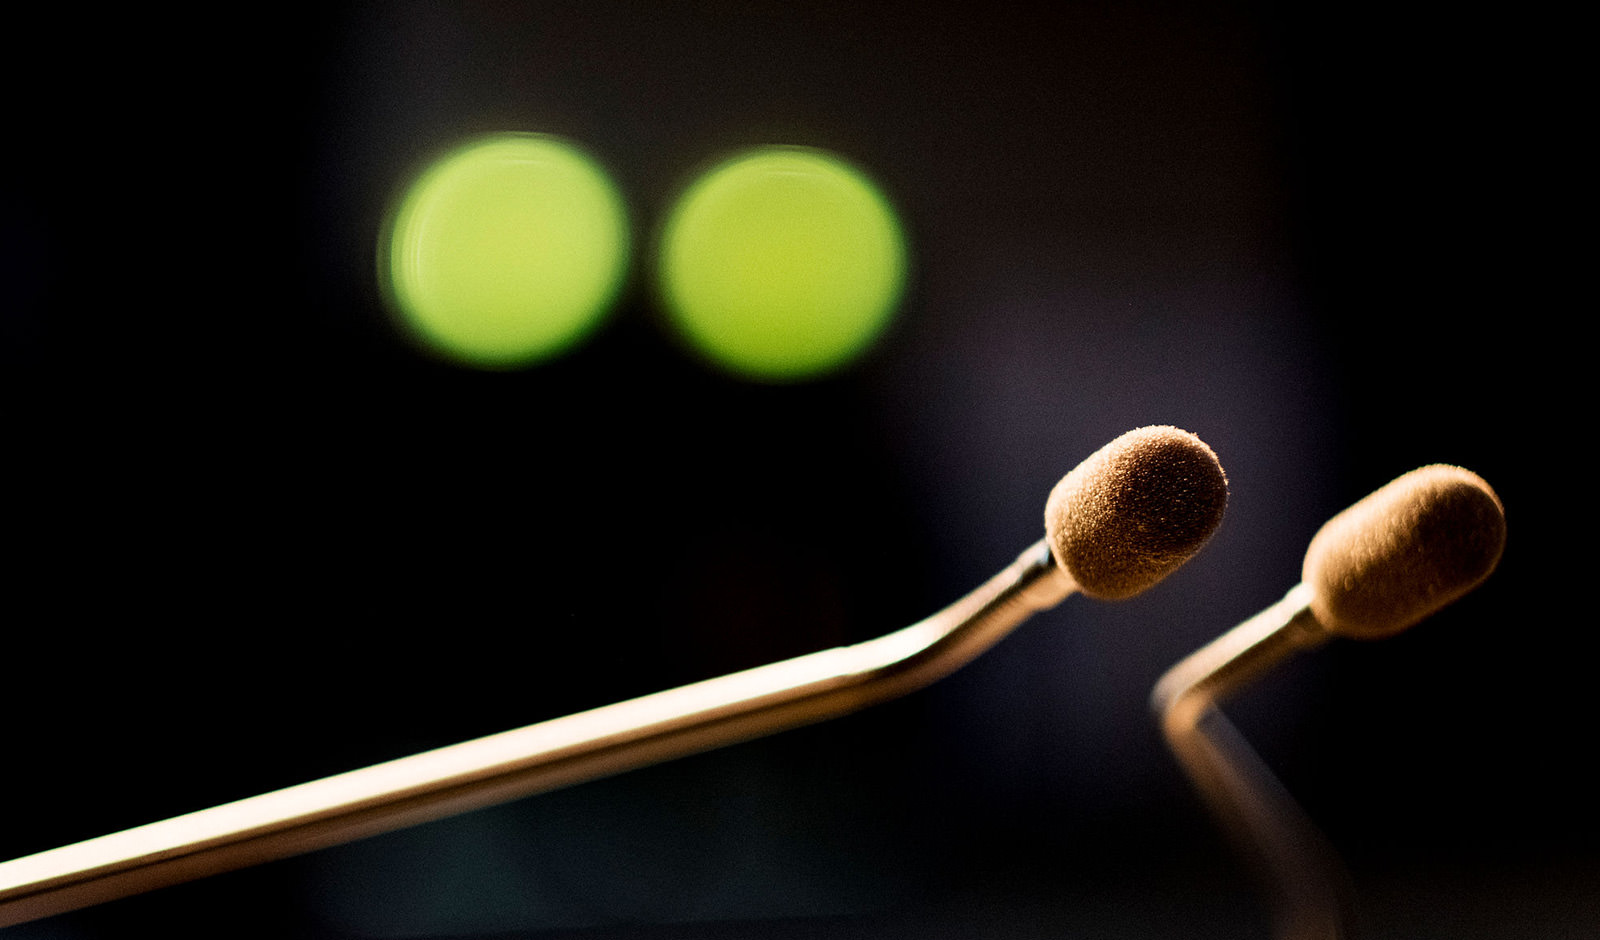 A close up image of a microphone